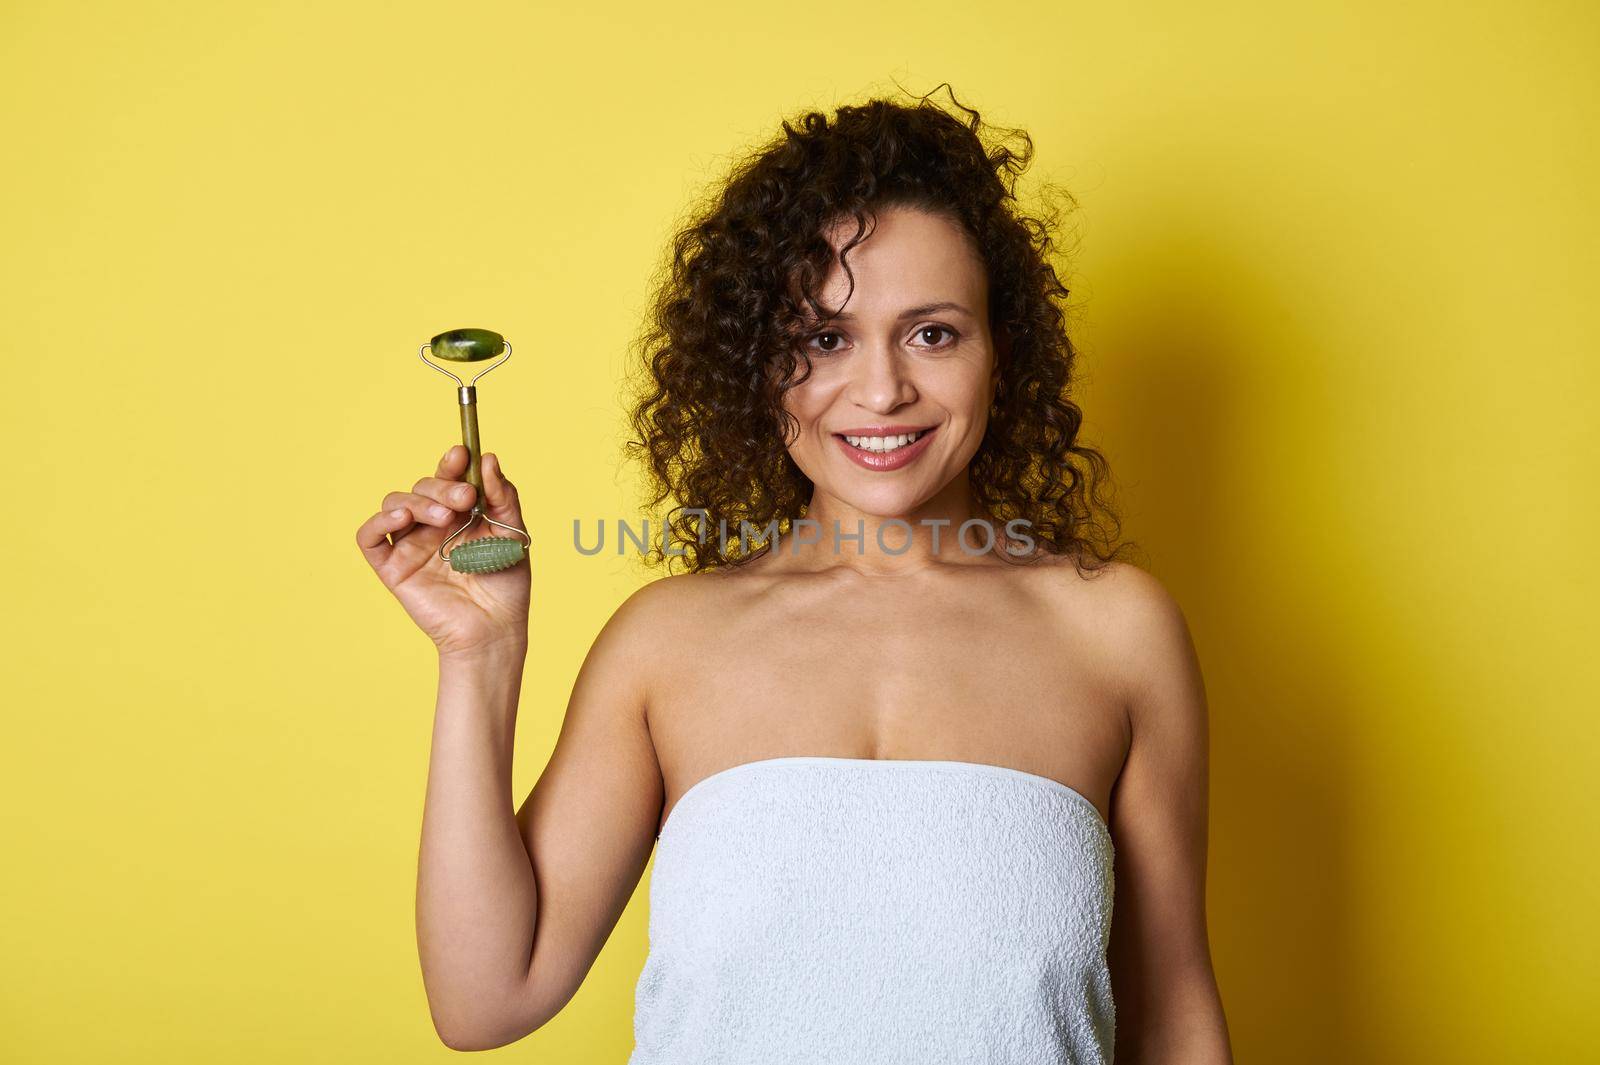 Beauty portrait of young curly haired woman holding jade roller and smiling toothy smile posing over yellow background with copy space